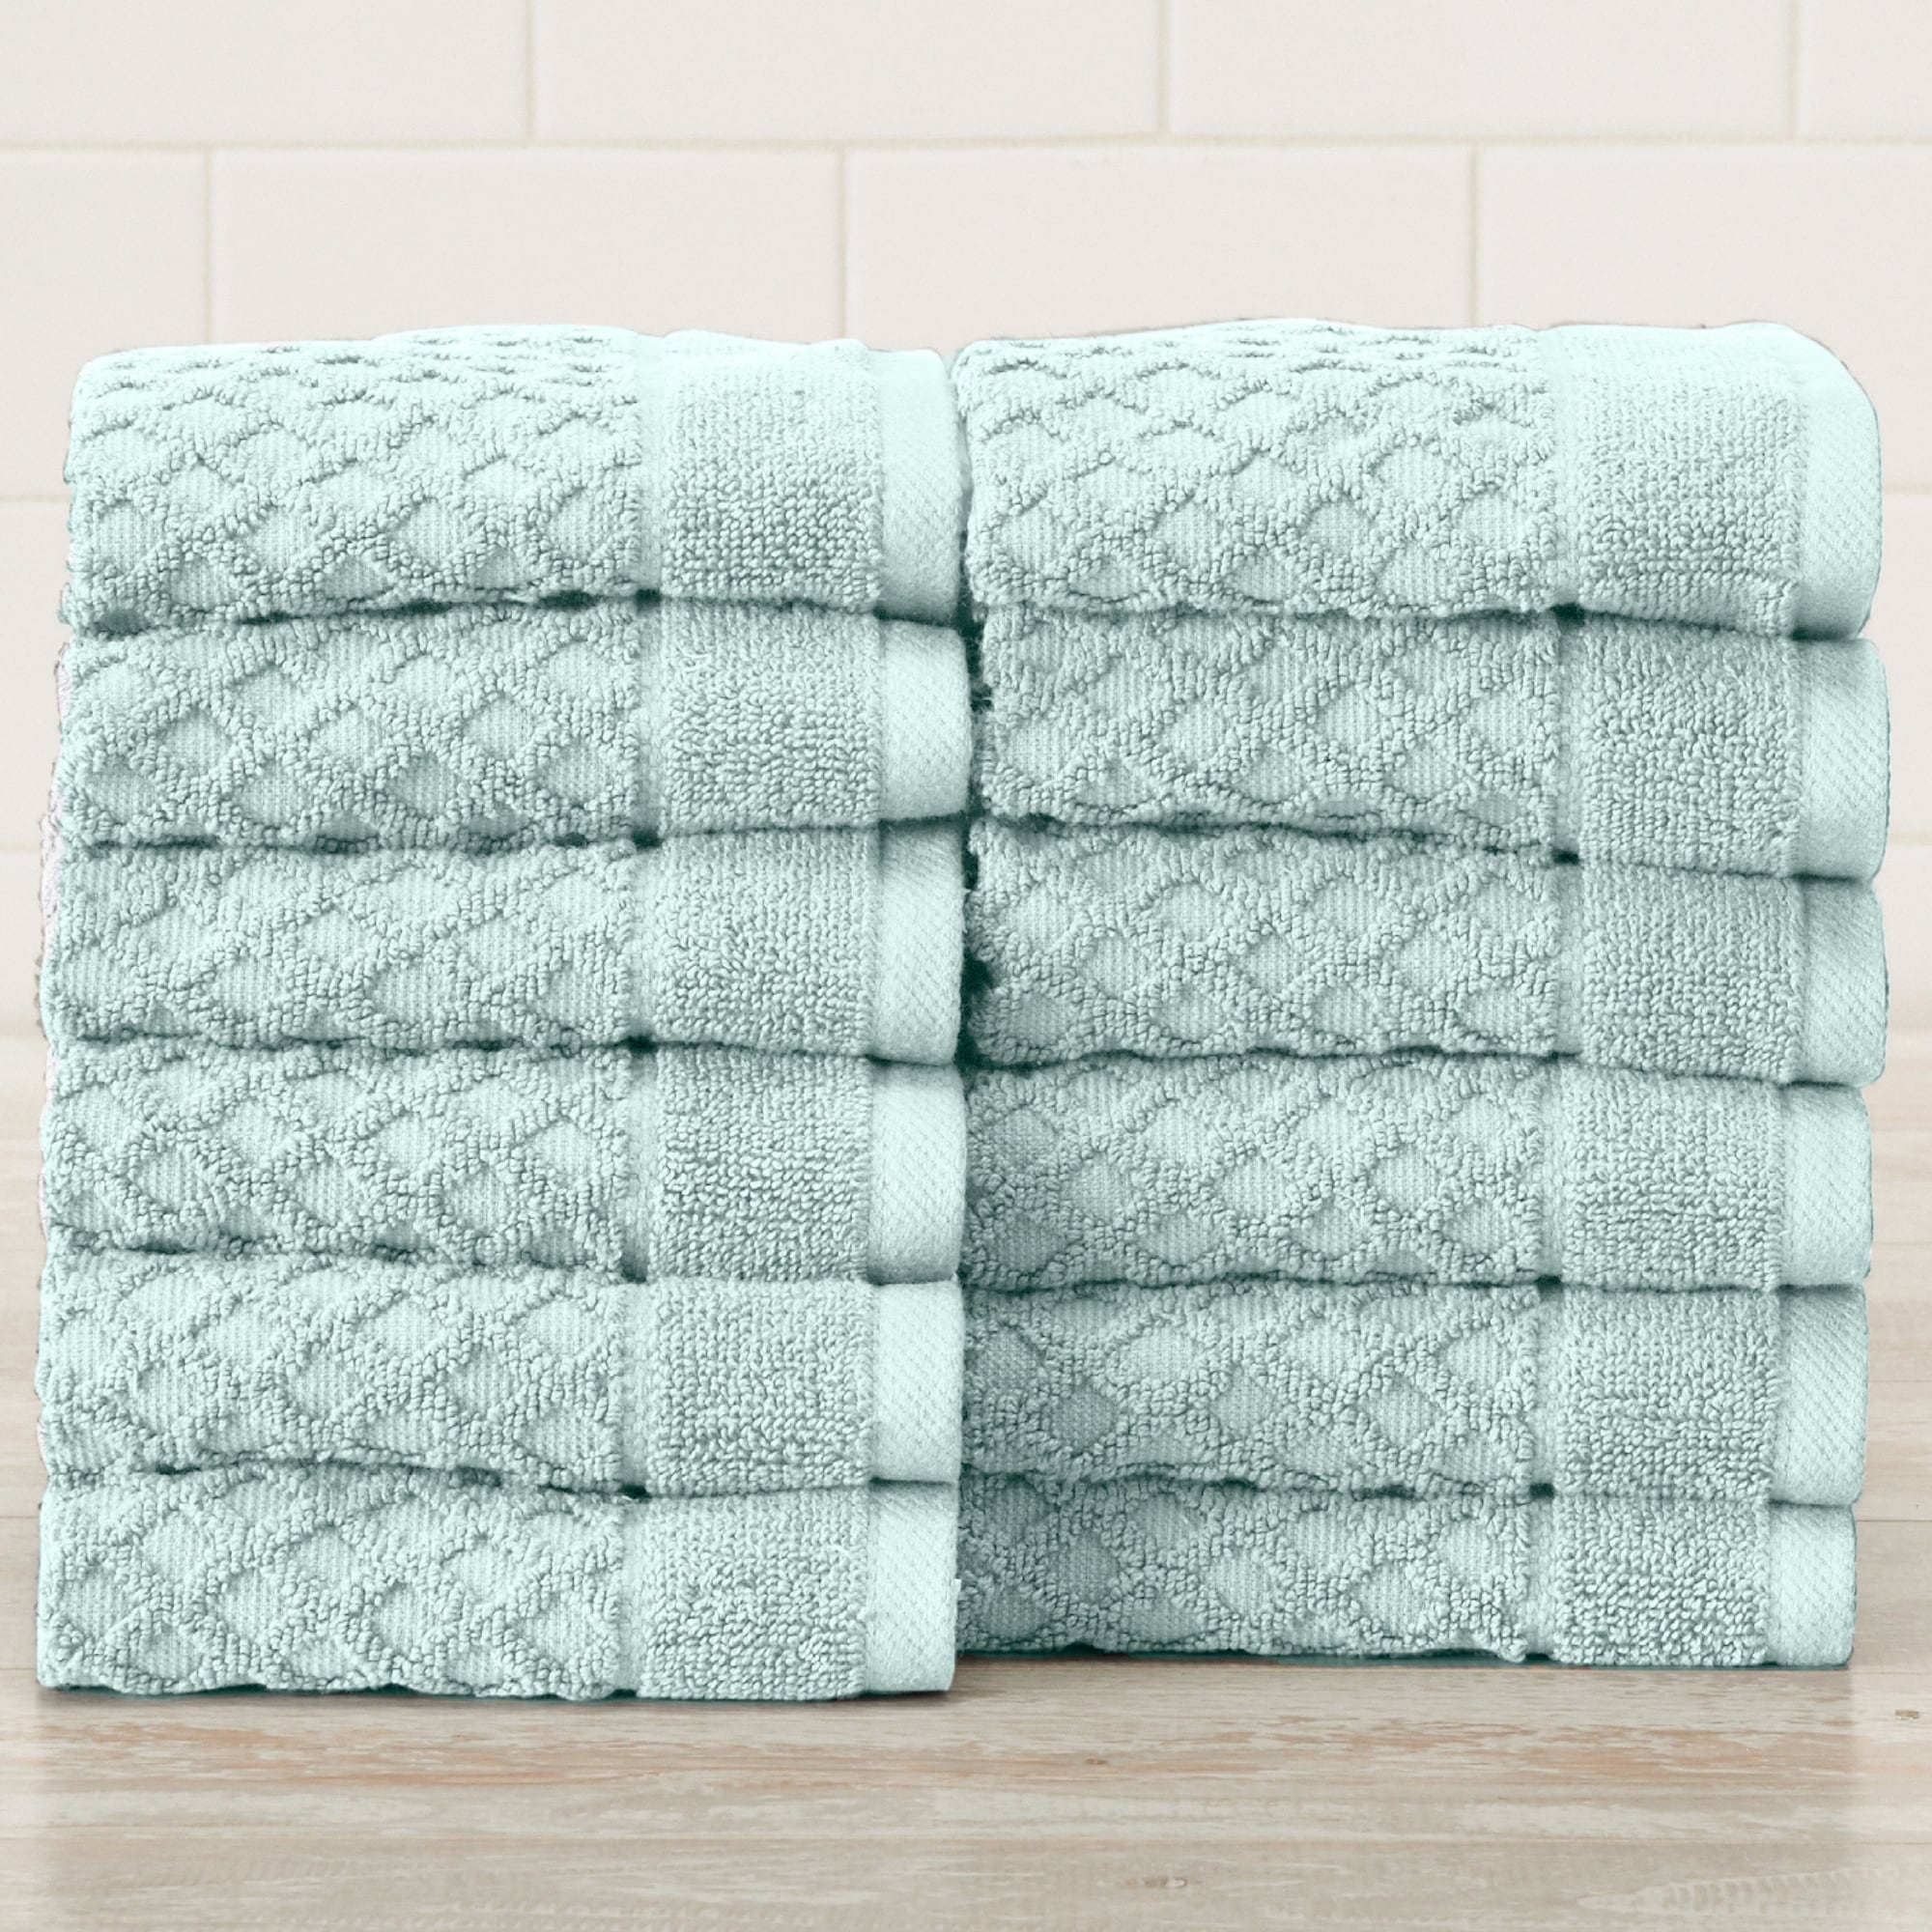 https://ak1.ostkcdn.com/images/products/is/images/direct/bf6fedec85a721a36da90966ceb6e0e0469116f4/Cotton-Textured-Towel-Set-Grayson-Collection.jpg